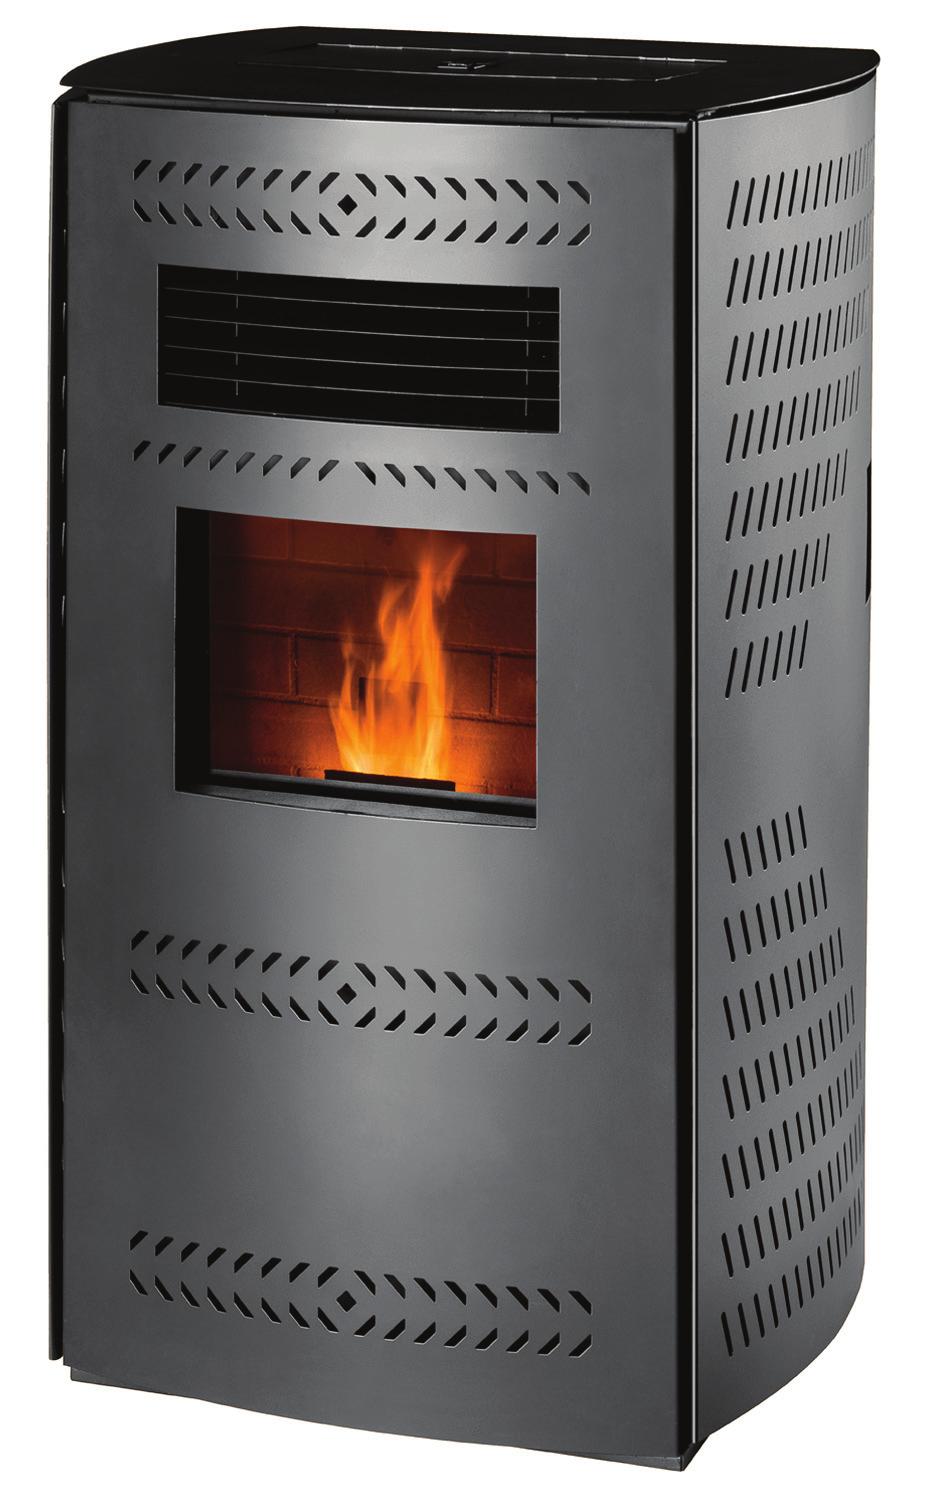 Pellet Stoves 55-TRPIP 2,200 Sq. Ft. Pellet Stove Auto With One Start nition h Ig o T Contemporary styling makes this an excellent match for any room Heats up to 2,200 sq. ft.